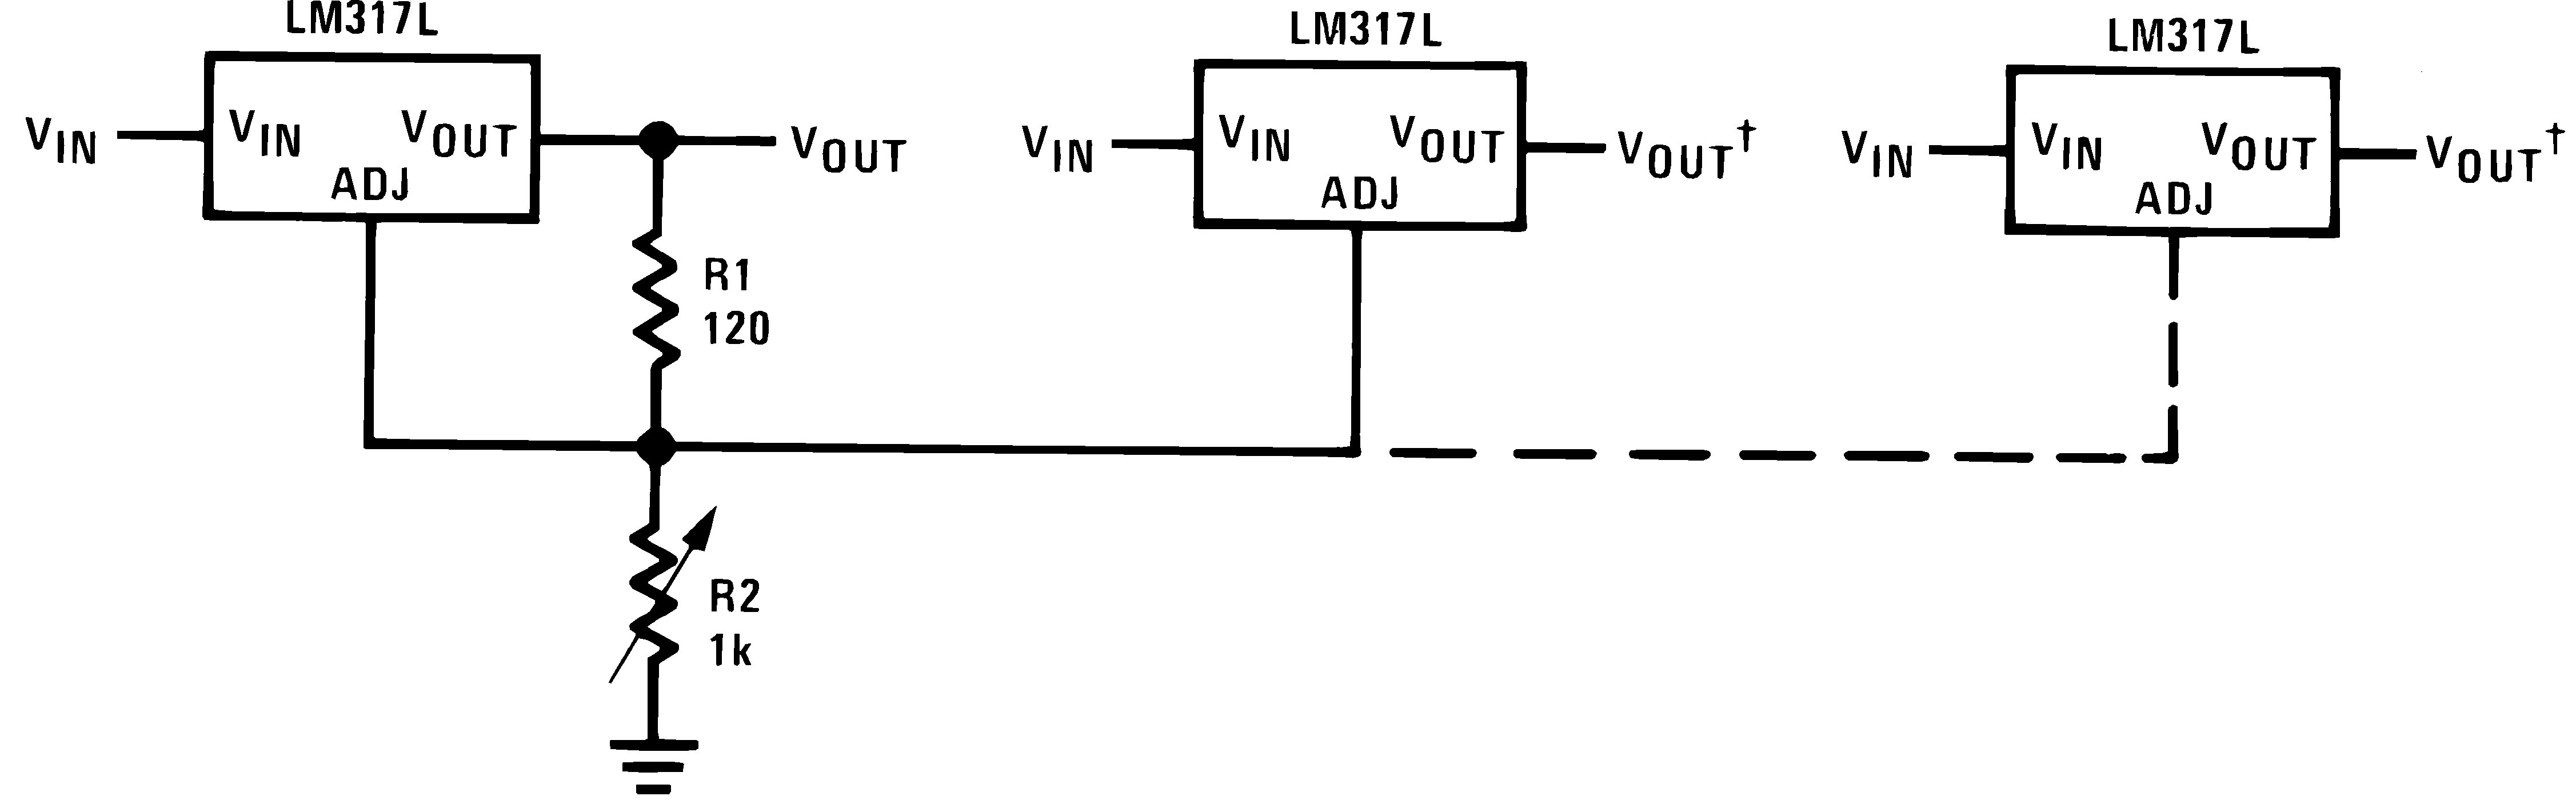 LM317L-N 906422.png